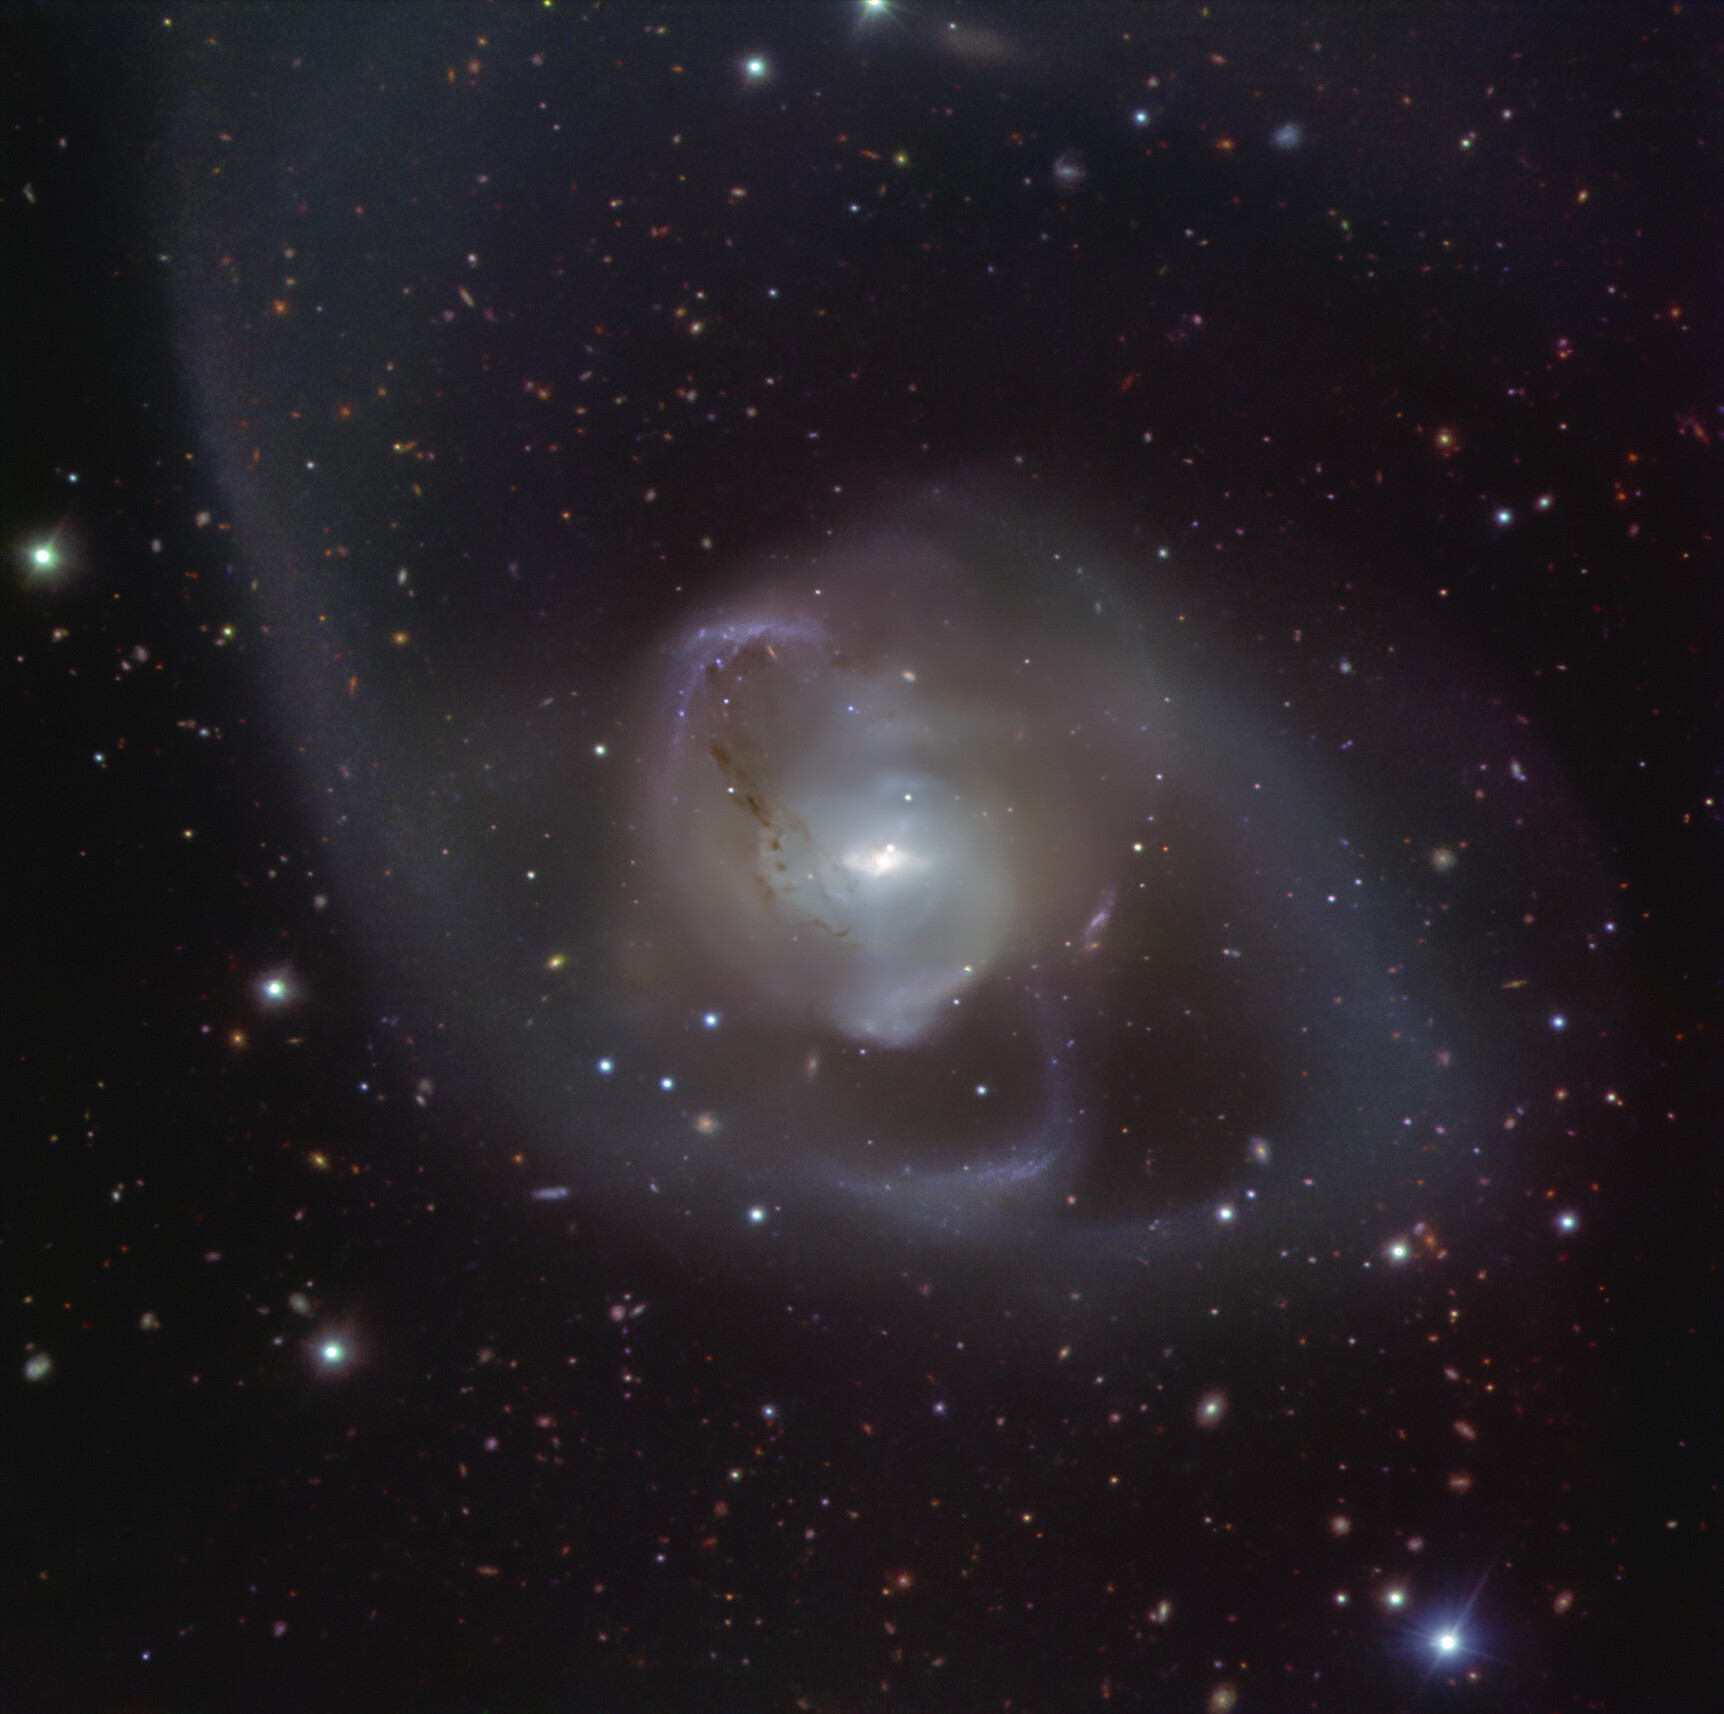 Around a billion years ago, two galaxies merged to form NGC 7727. NGC 7727's wispy shape is the result of a cosmic dance between two galaxies. Credit: ESO.